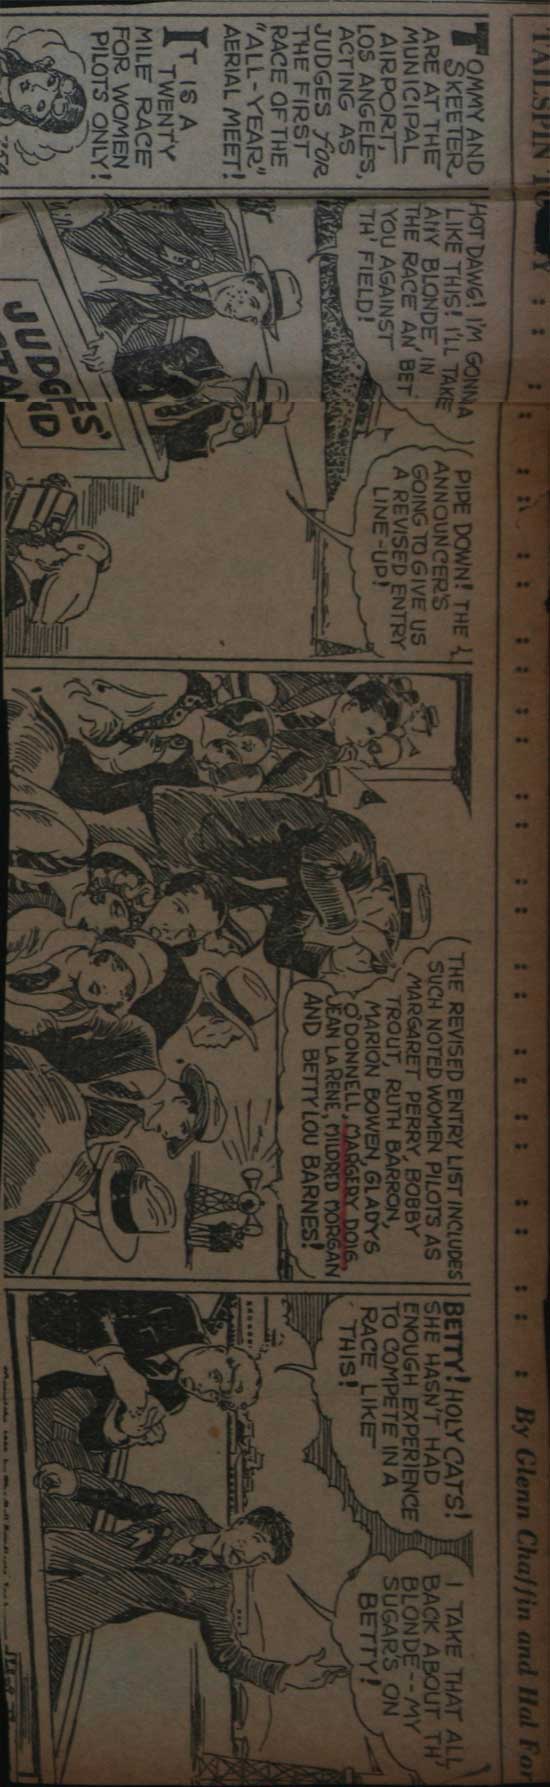 "Tailspin Tommy" Strip From Near the 1930 NAR